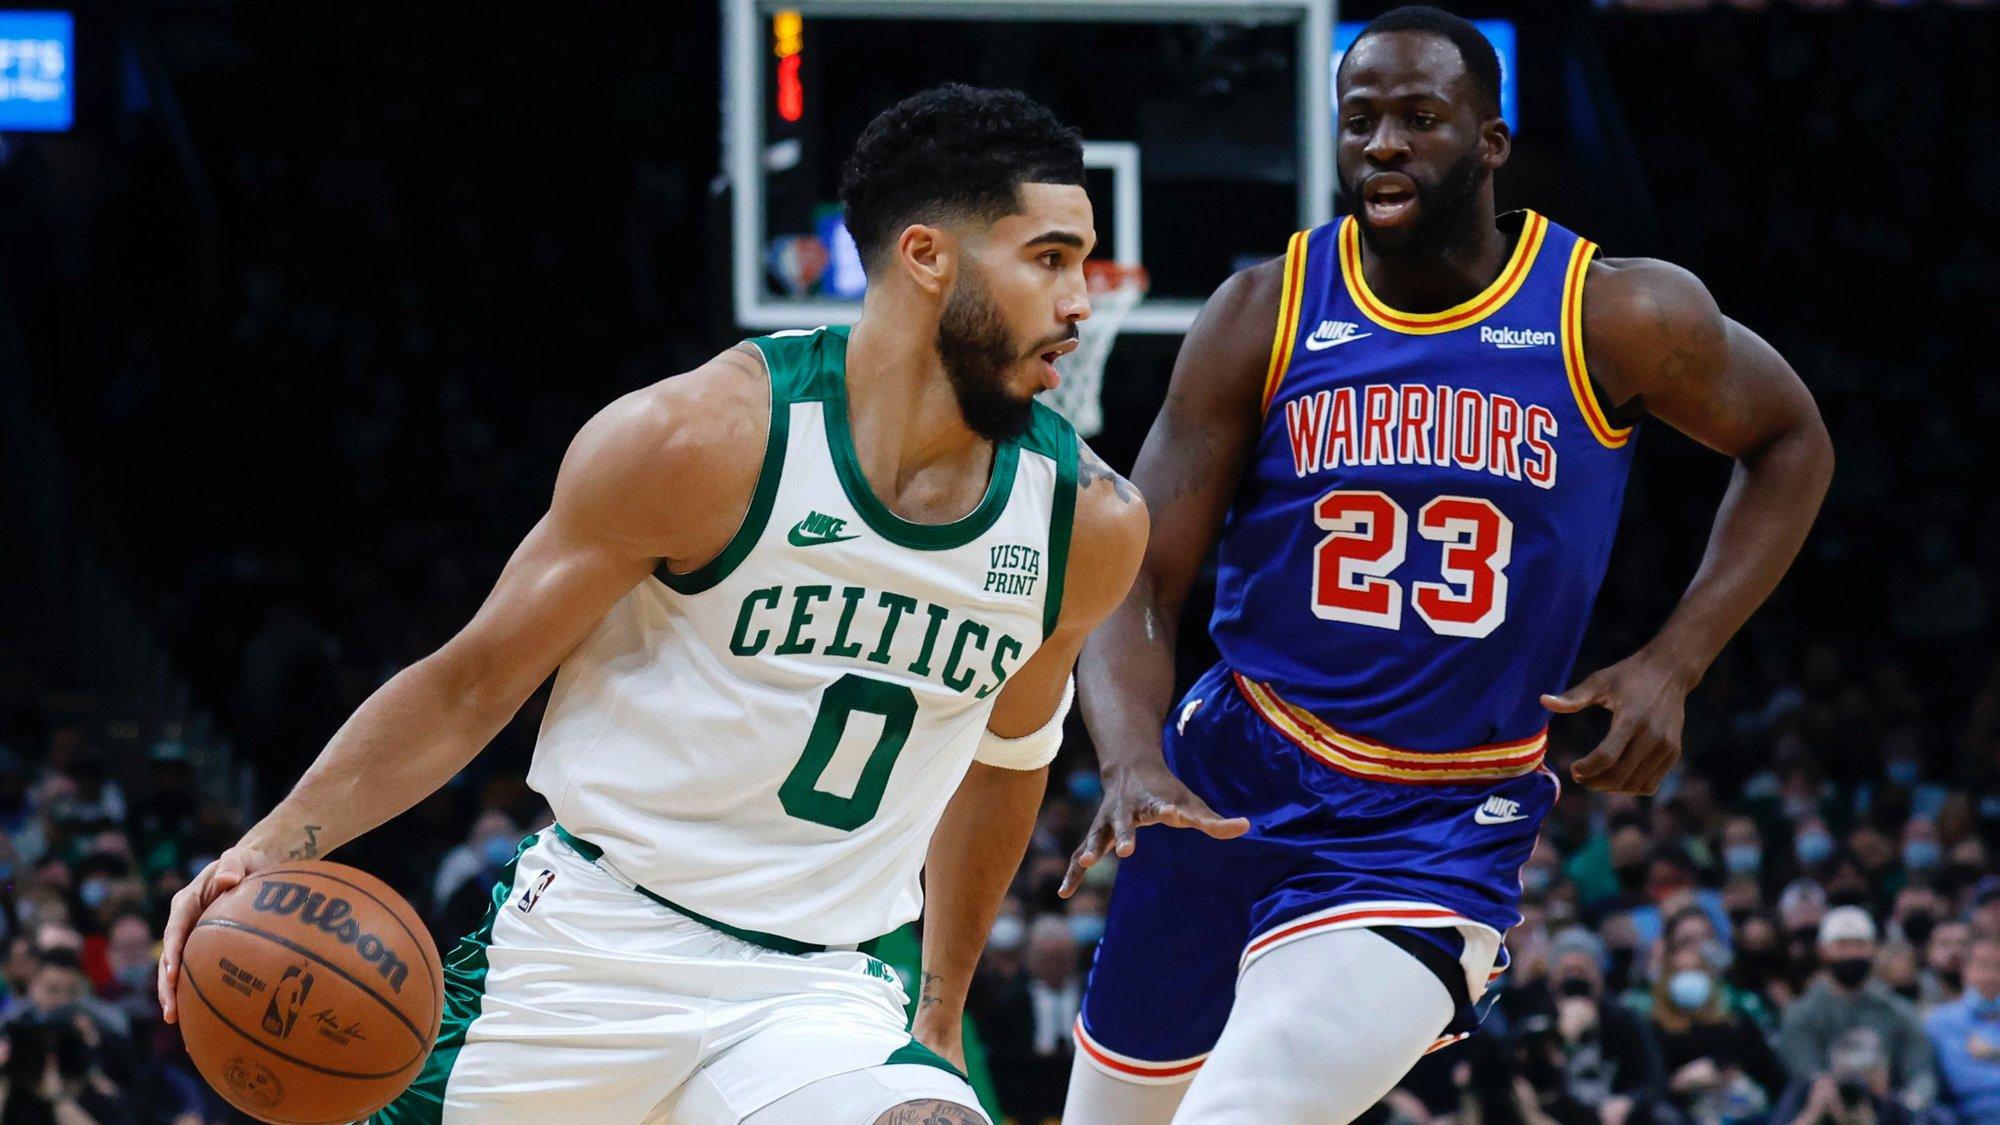 Celtics vs. Warriors Game 2 Betting: Warriors to Even Series in Close Game